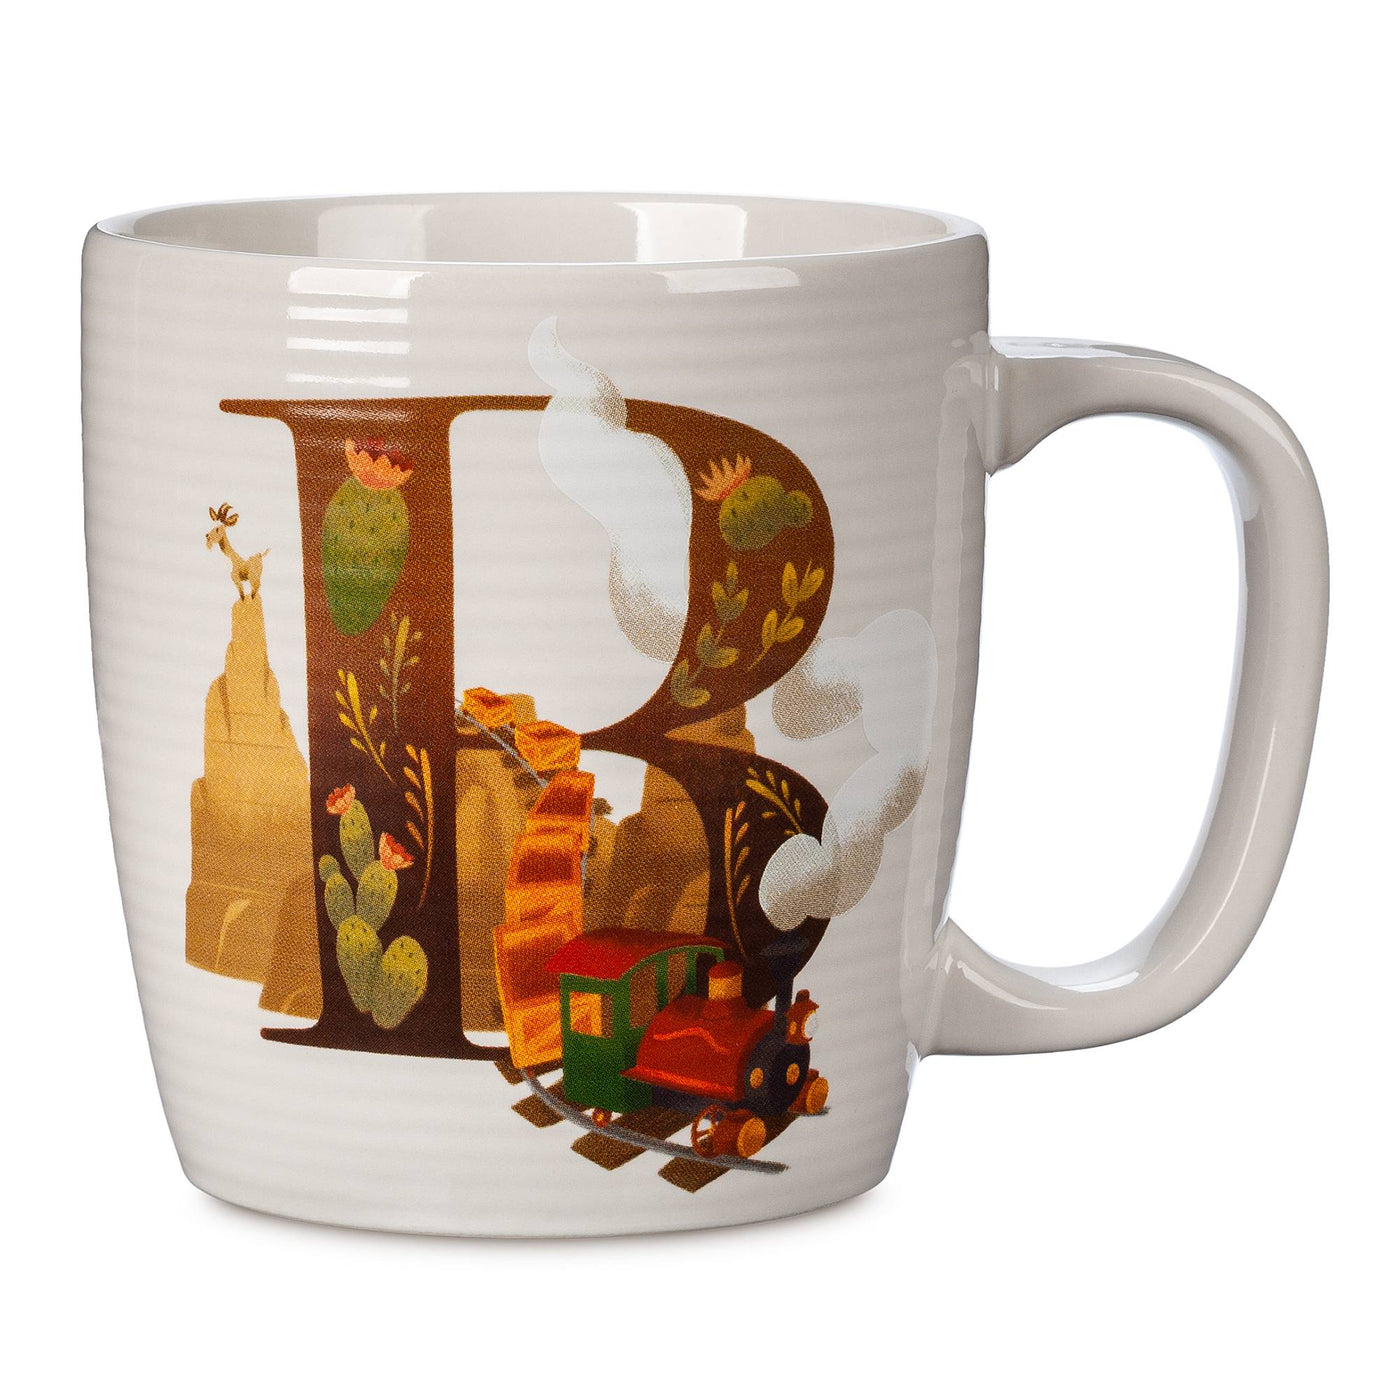 Disney Parks ABC Letters B is for Big Thunder Mountain Railroad Coffee Mug New